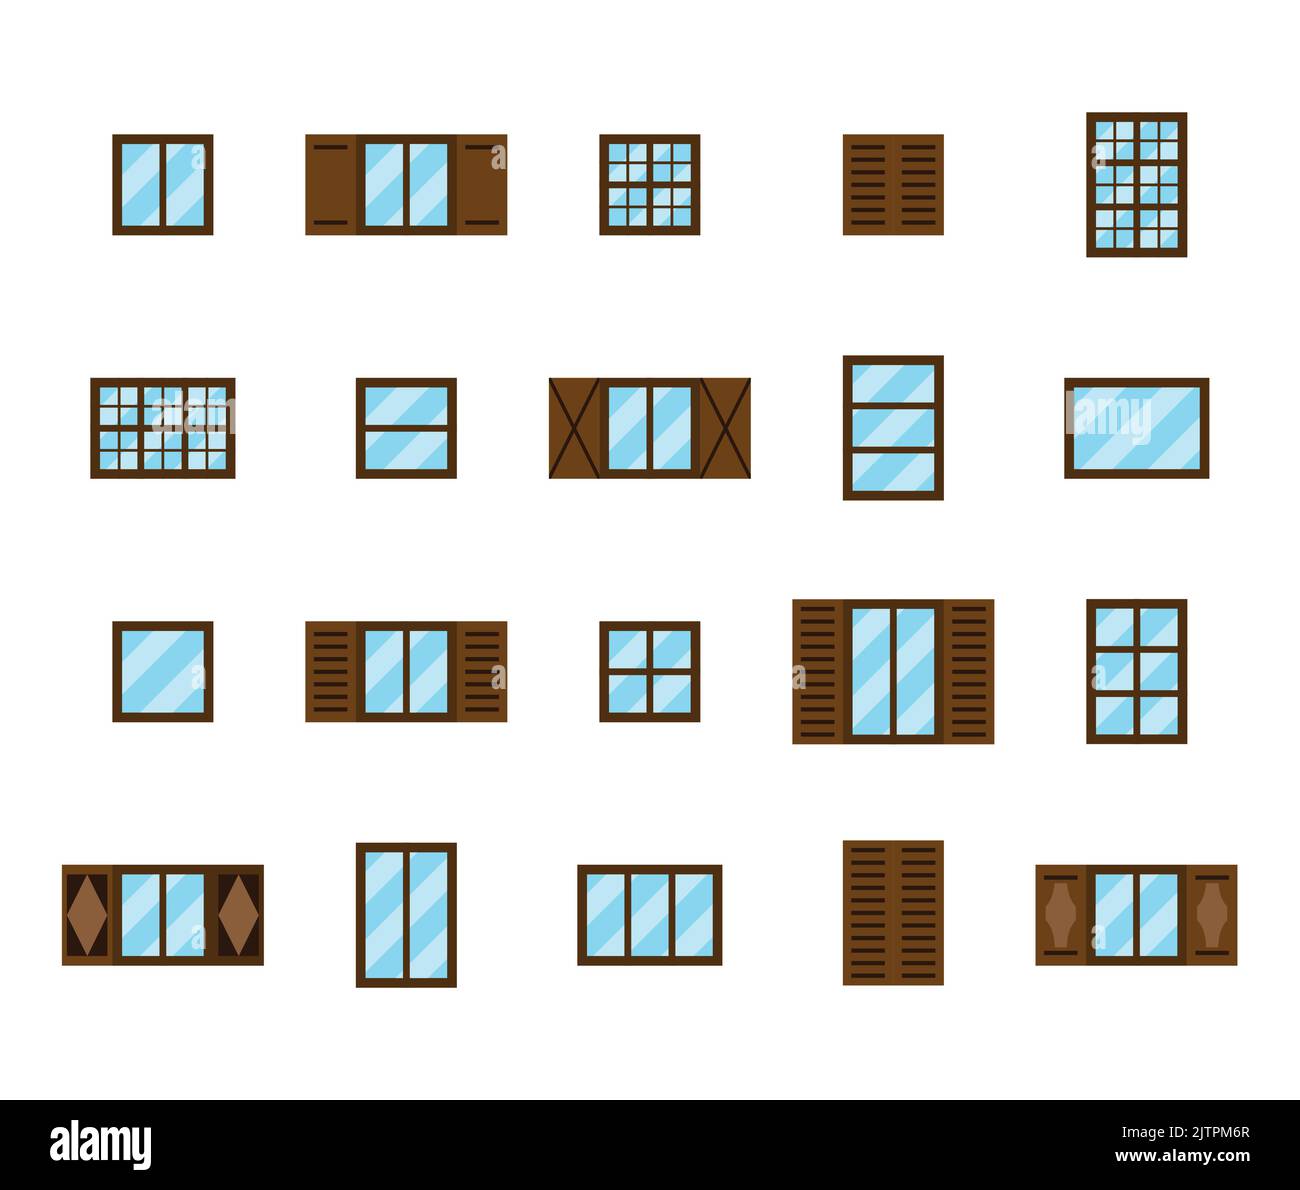 Set of flat compatible house windows in the same style and size isolated on white background. Stock Vector